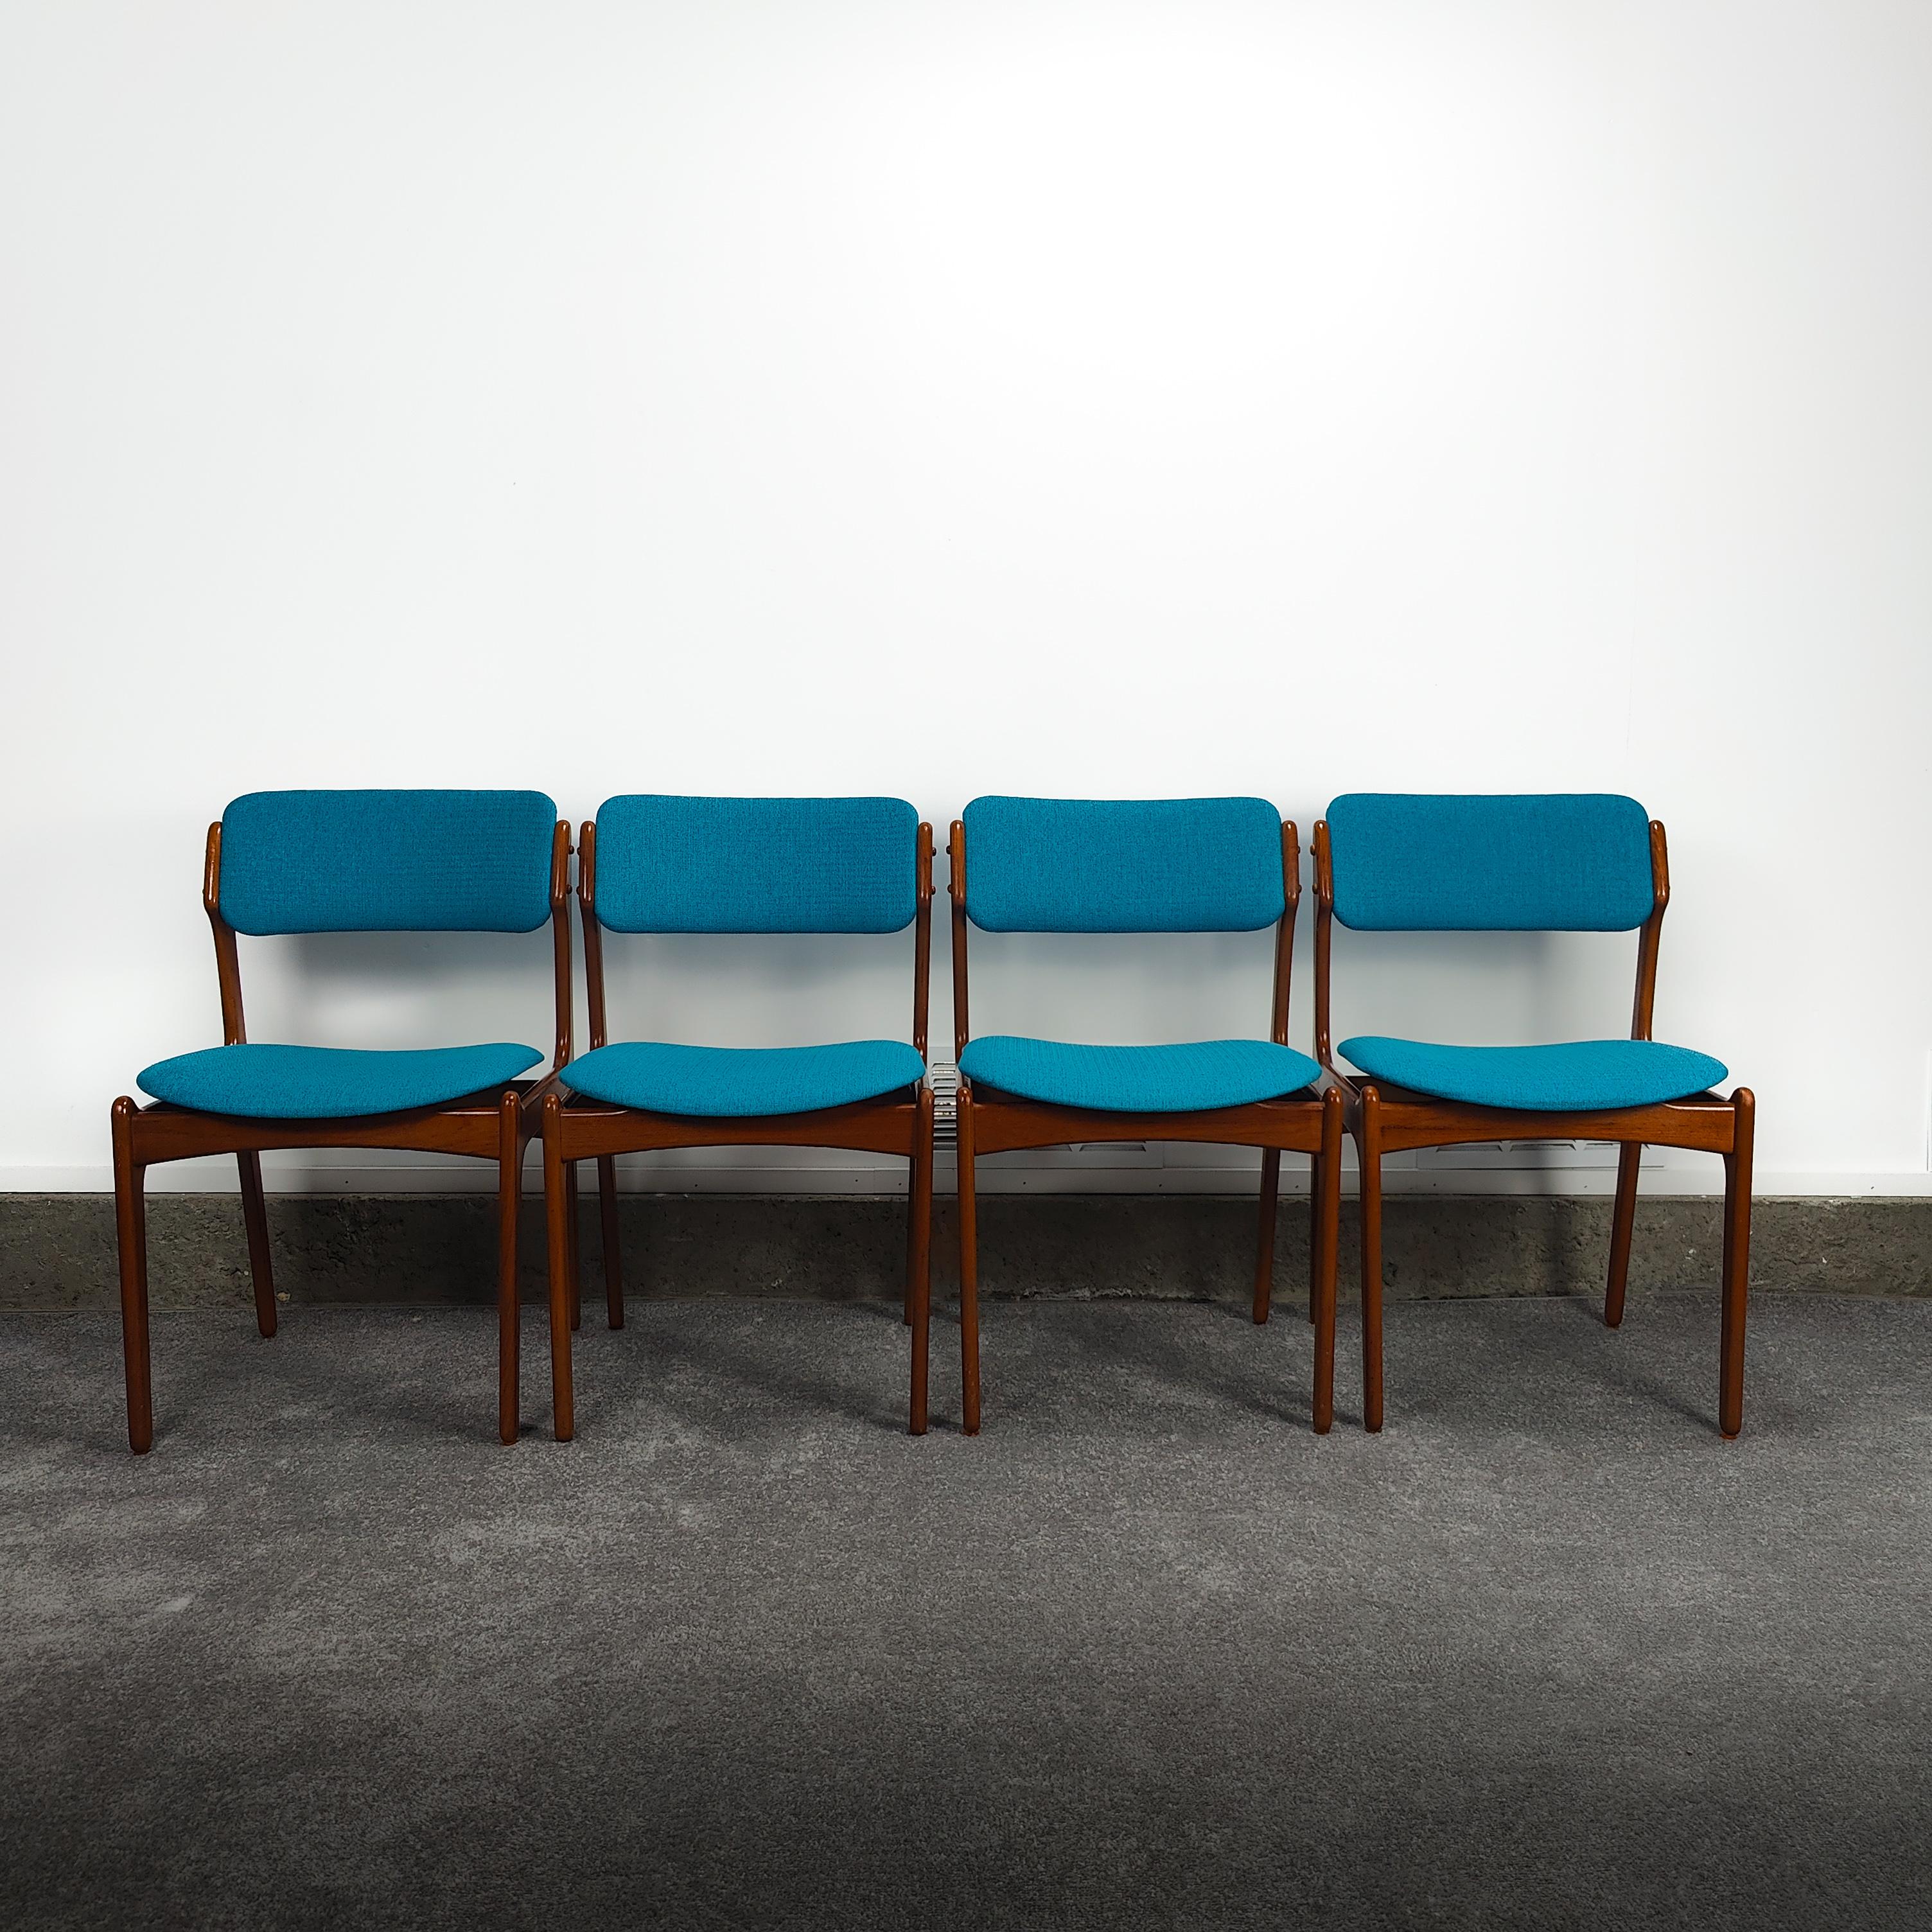 Now available is a set of 4 dining chairs by Erik Buch for o.d. Mobler. They feature a teak wood refinished with a beautiful aqua blue fabric. Each chair measures approximately 20